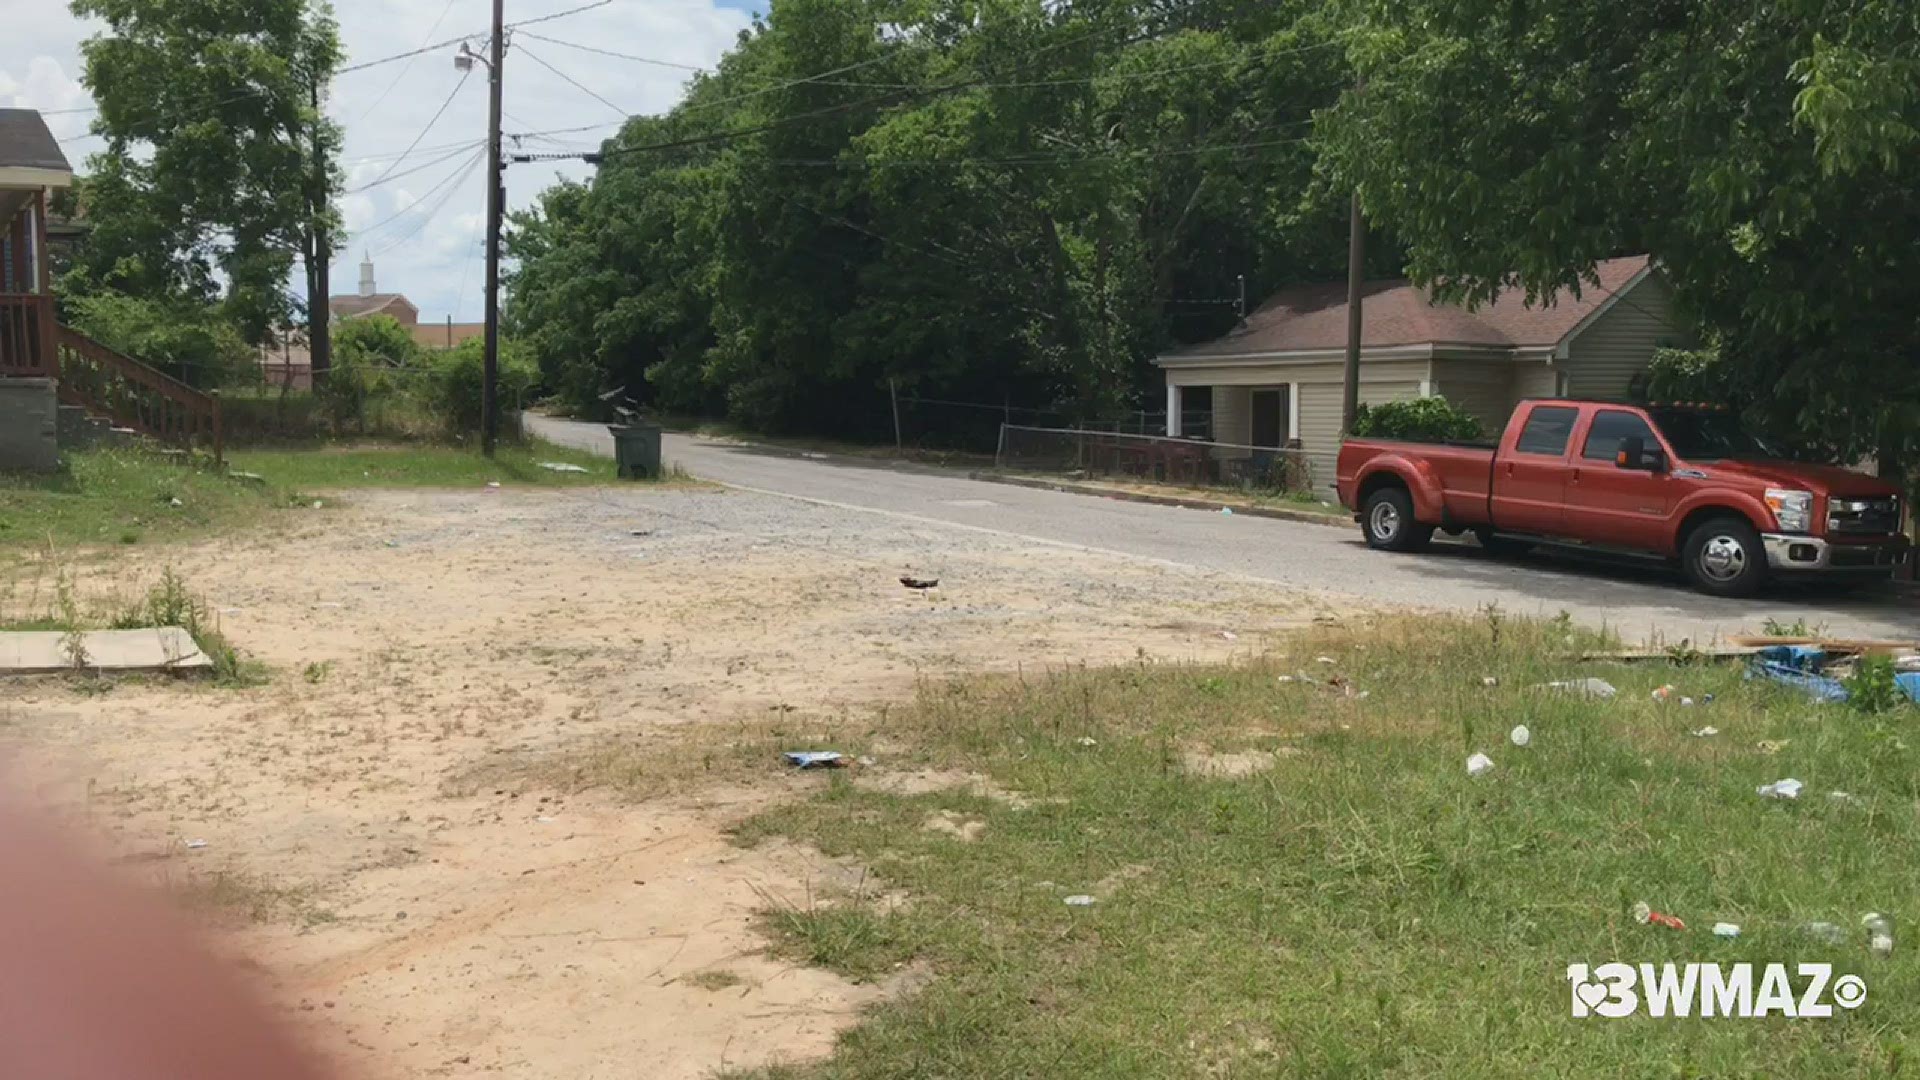 The Bibb County Sheriff's Office said it happened early Sunday morning on Patton Avenue.